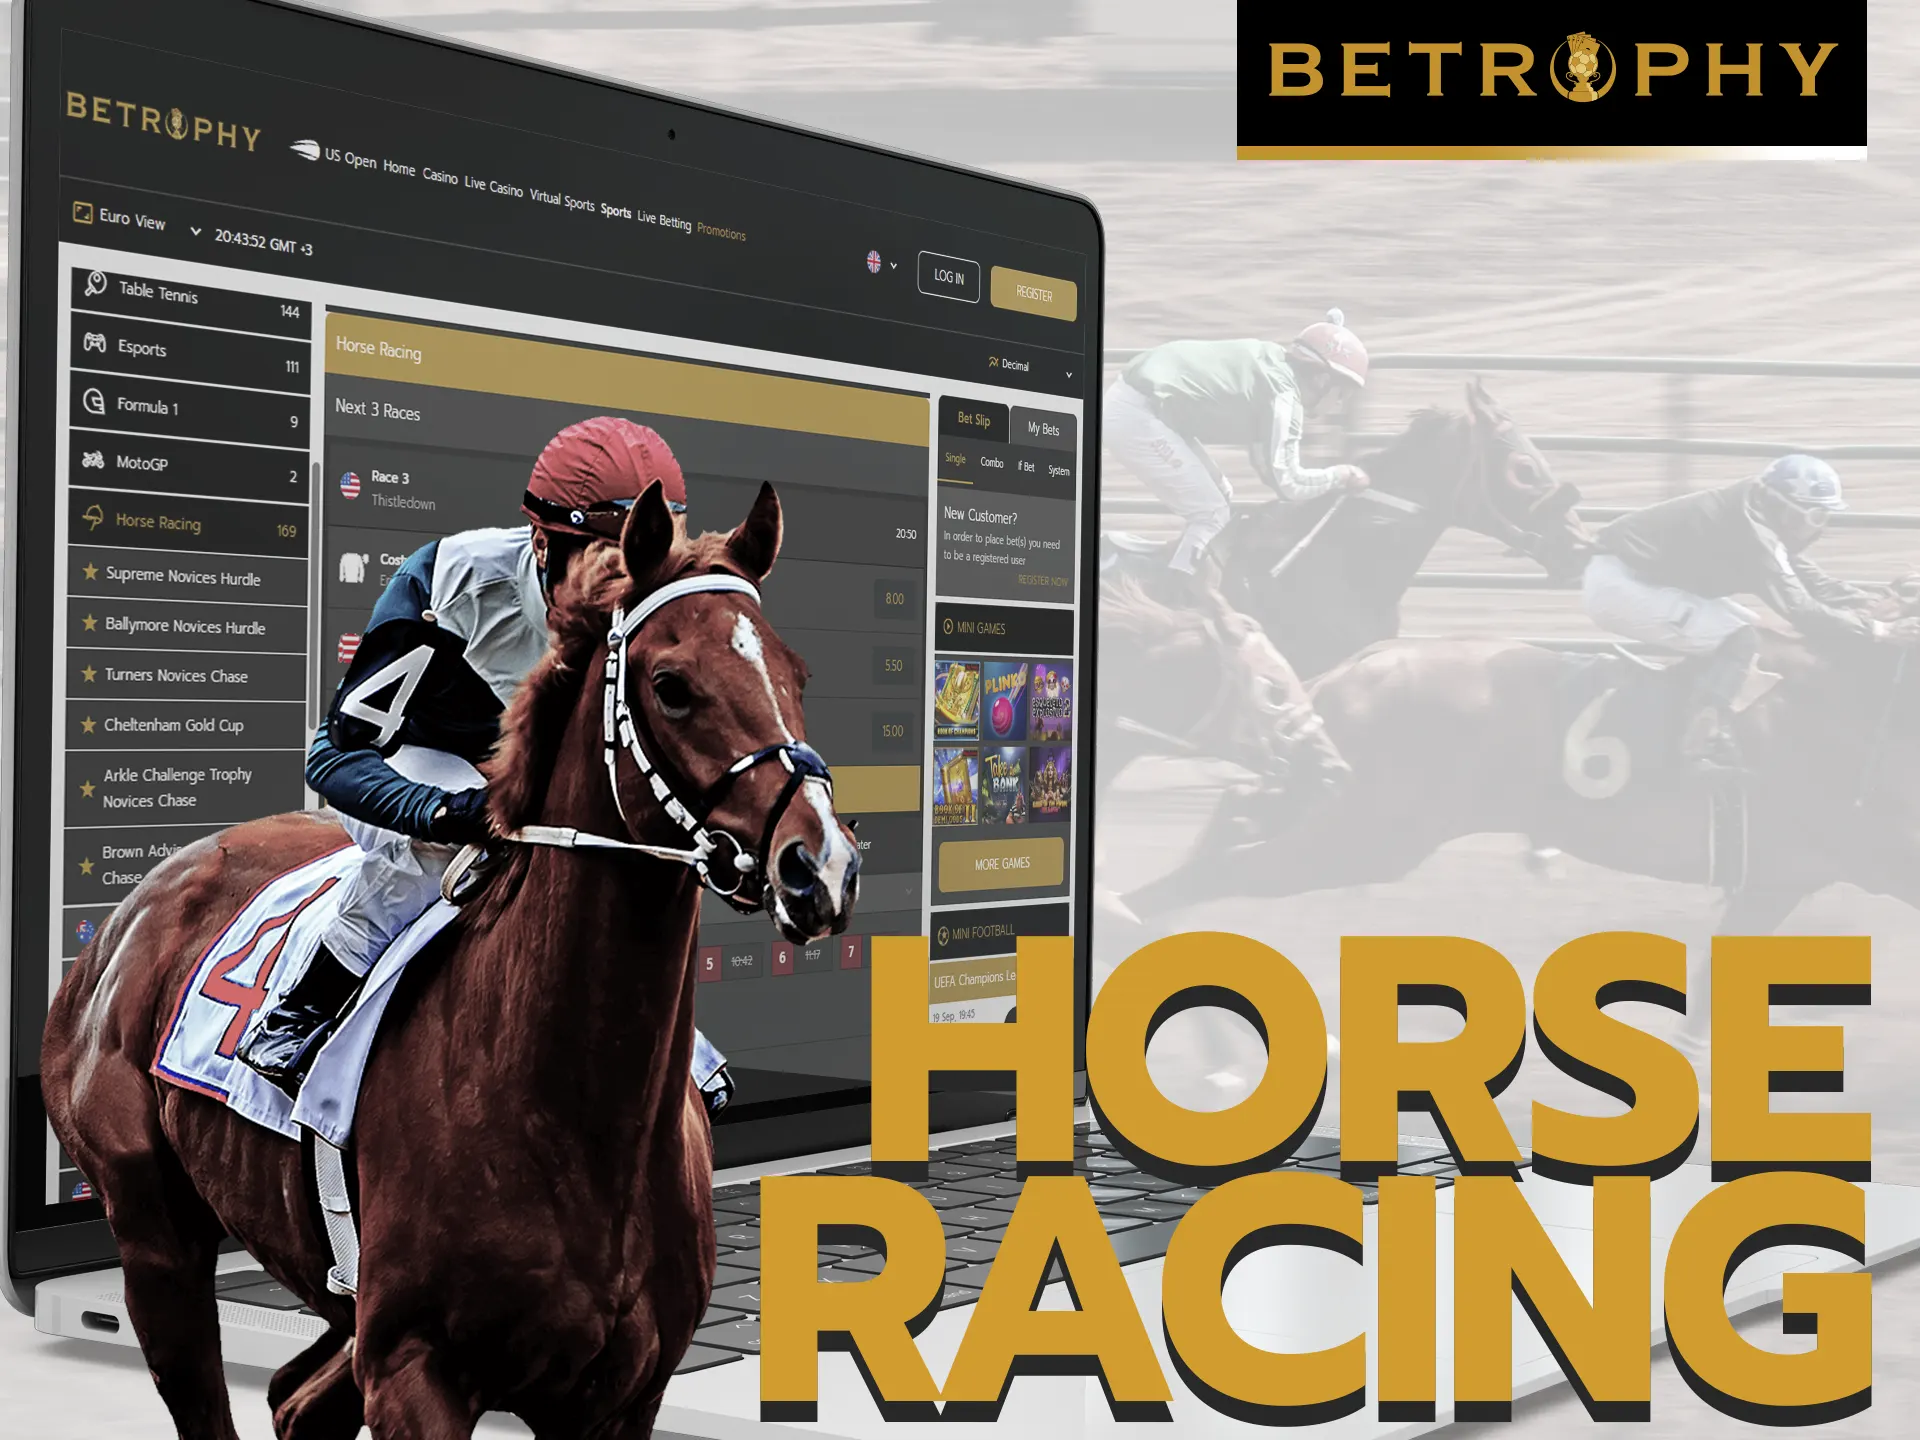 Place your horse racing bets with Betrophy.